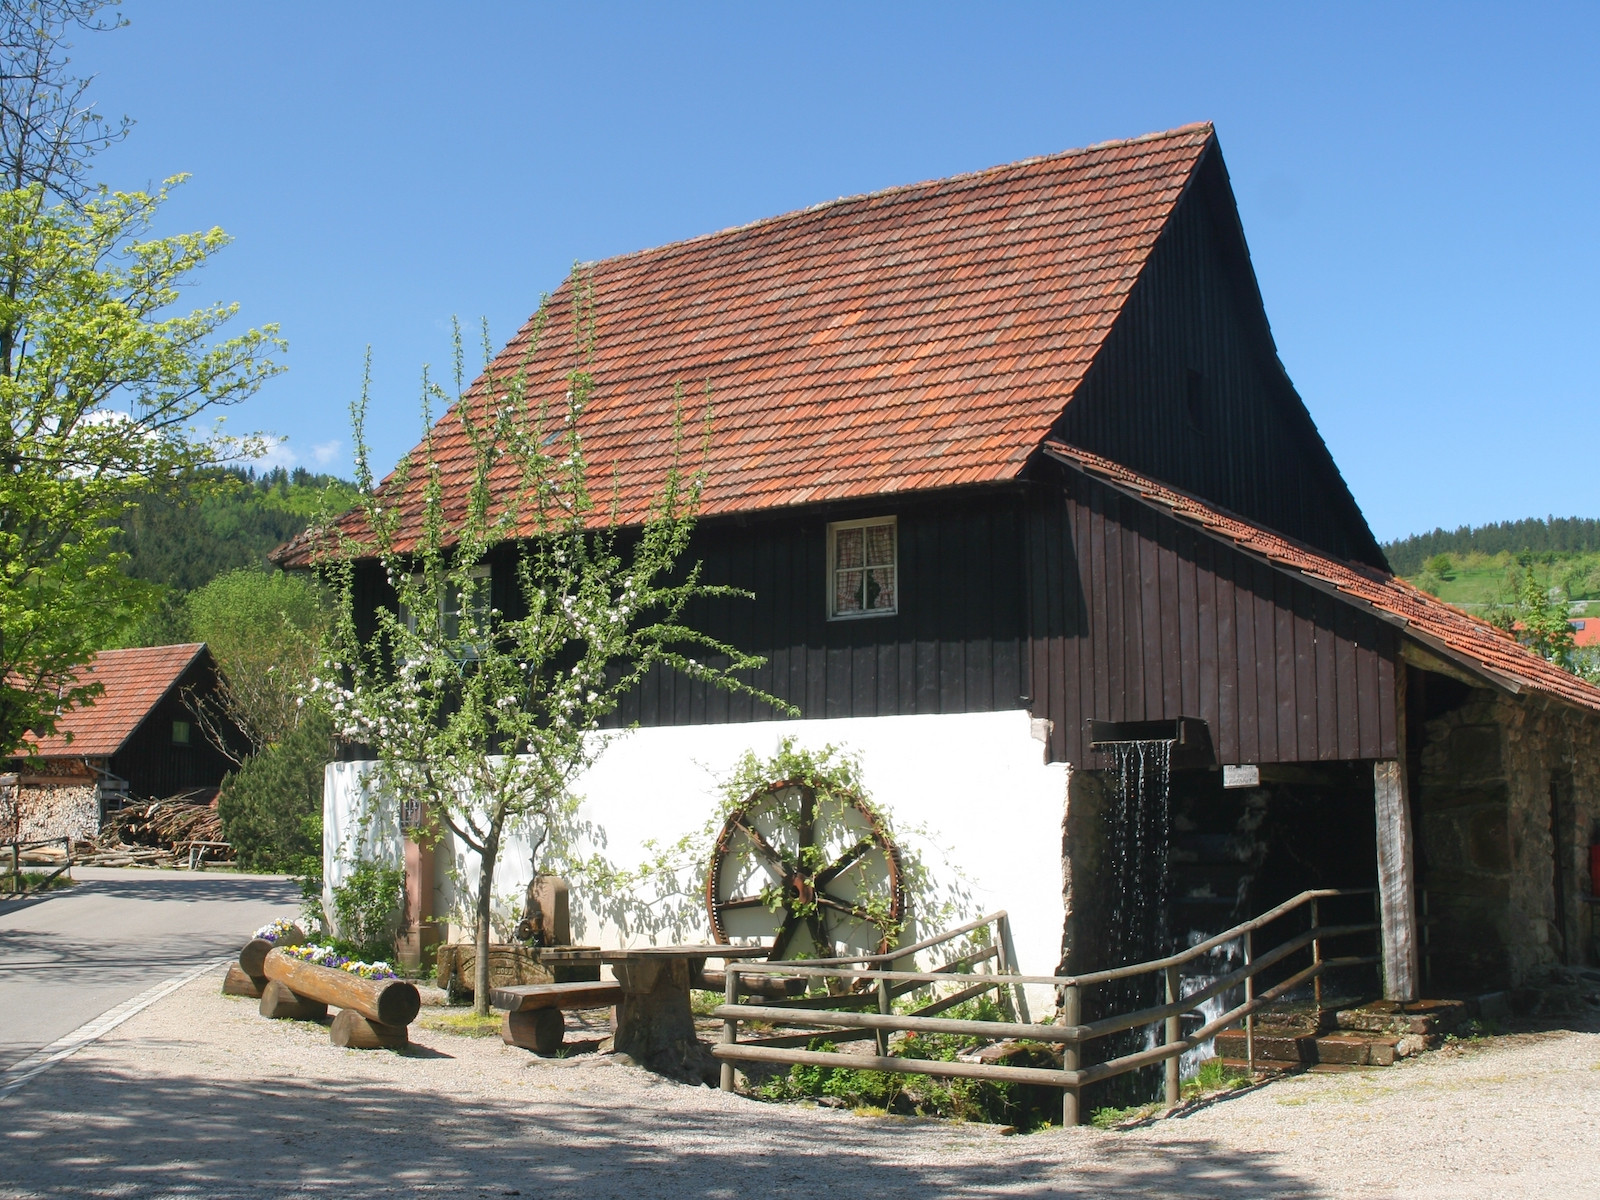                                                     Vollmers Mühle                                    